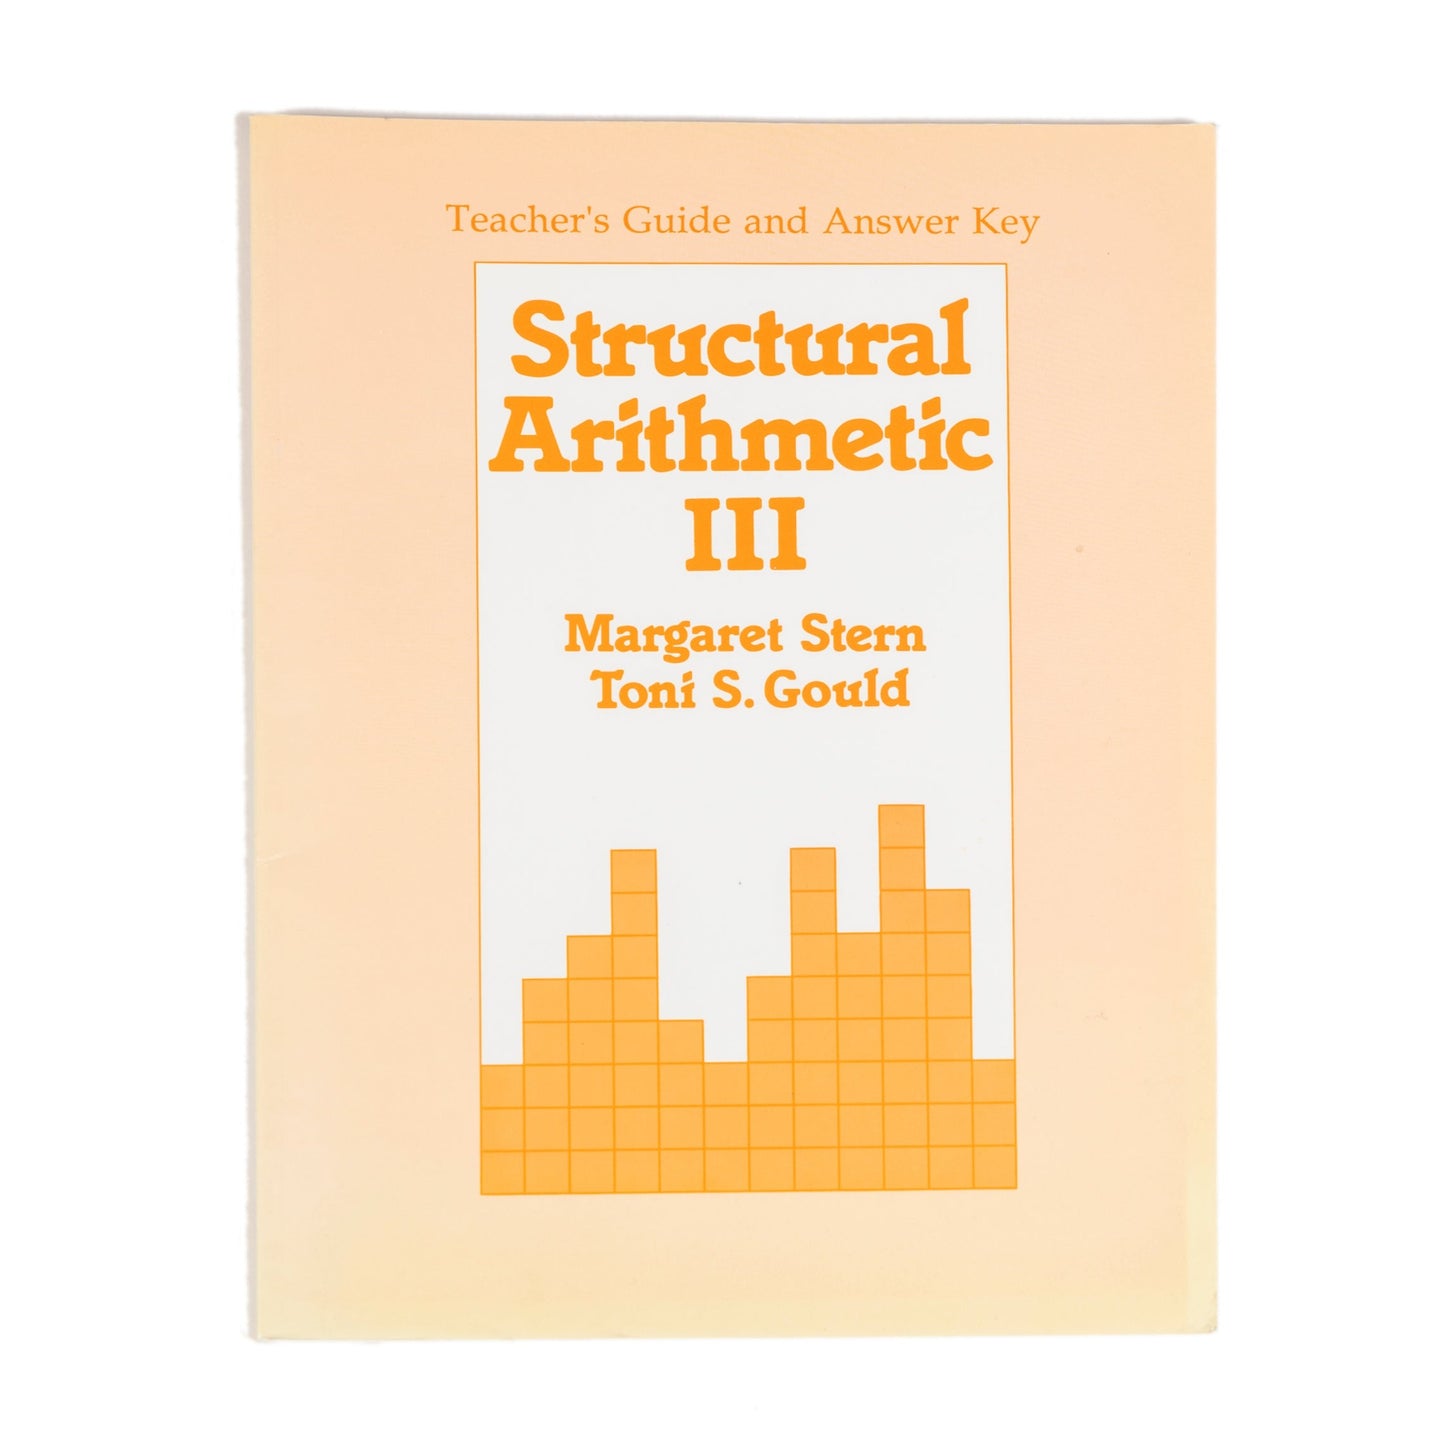 Structural Arithmetic III: Teachers Guide